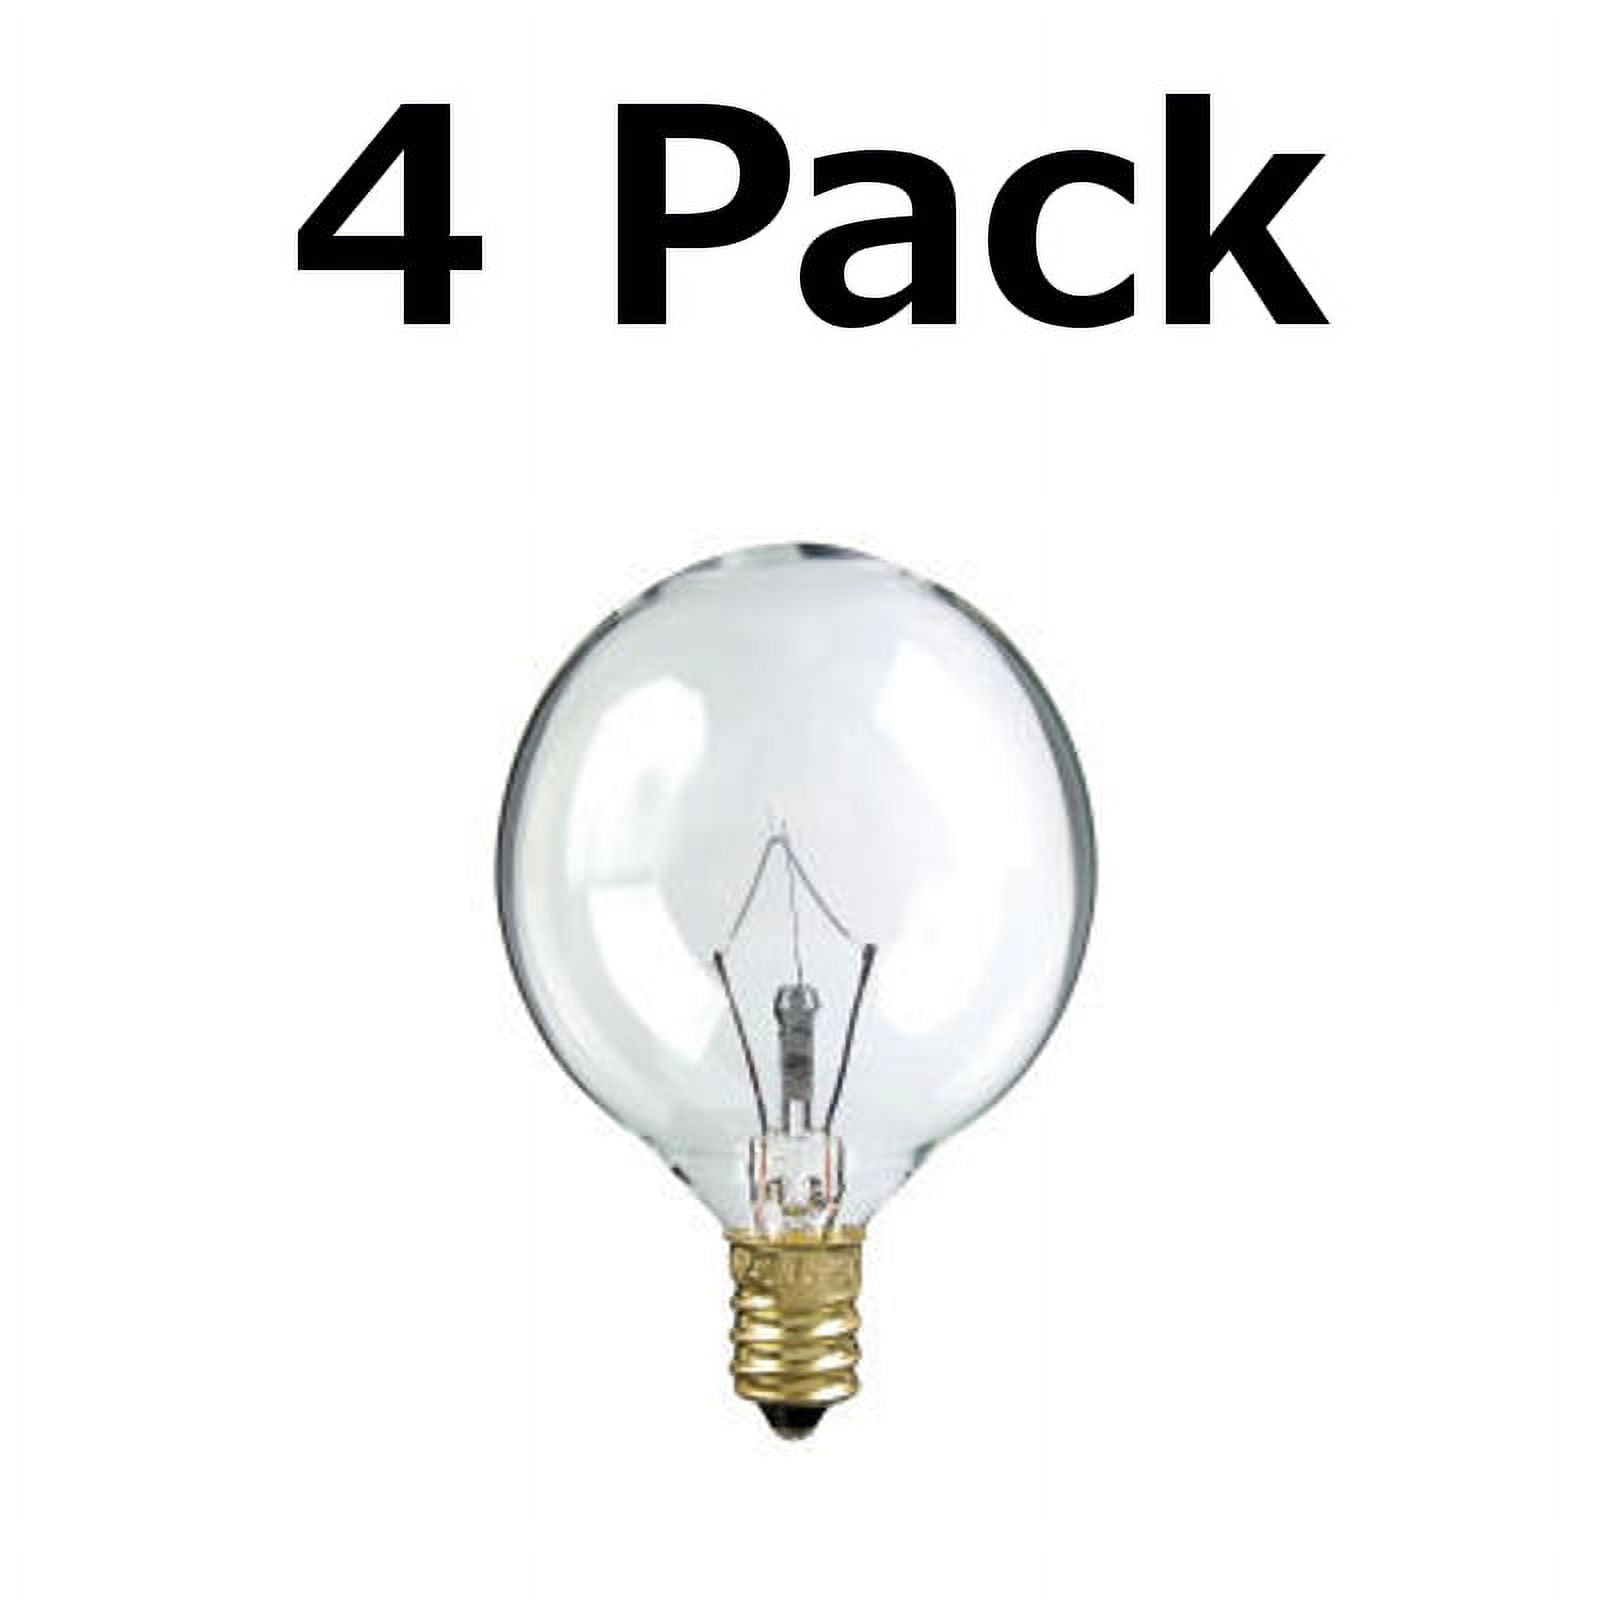 4 Pack Light Bulb For Large Scentsy Wax